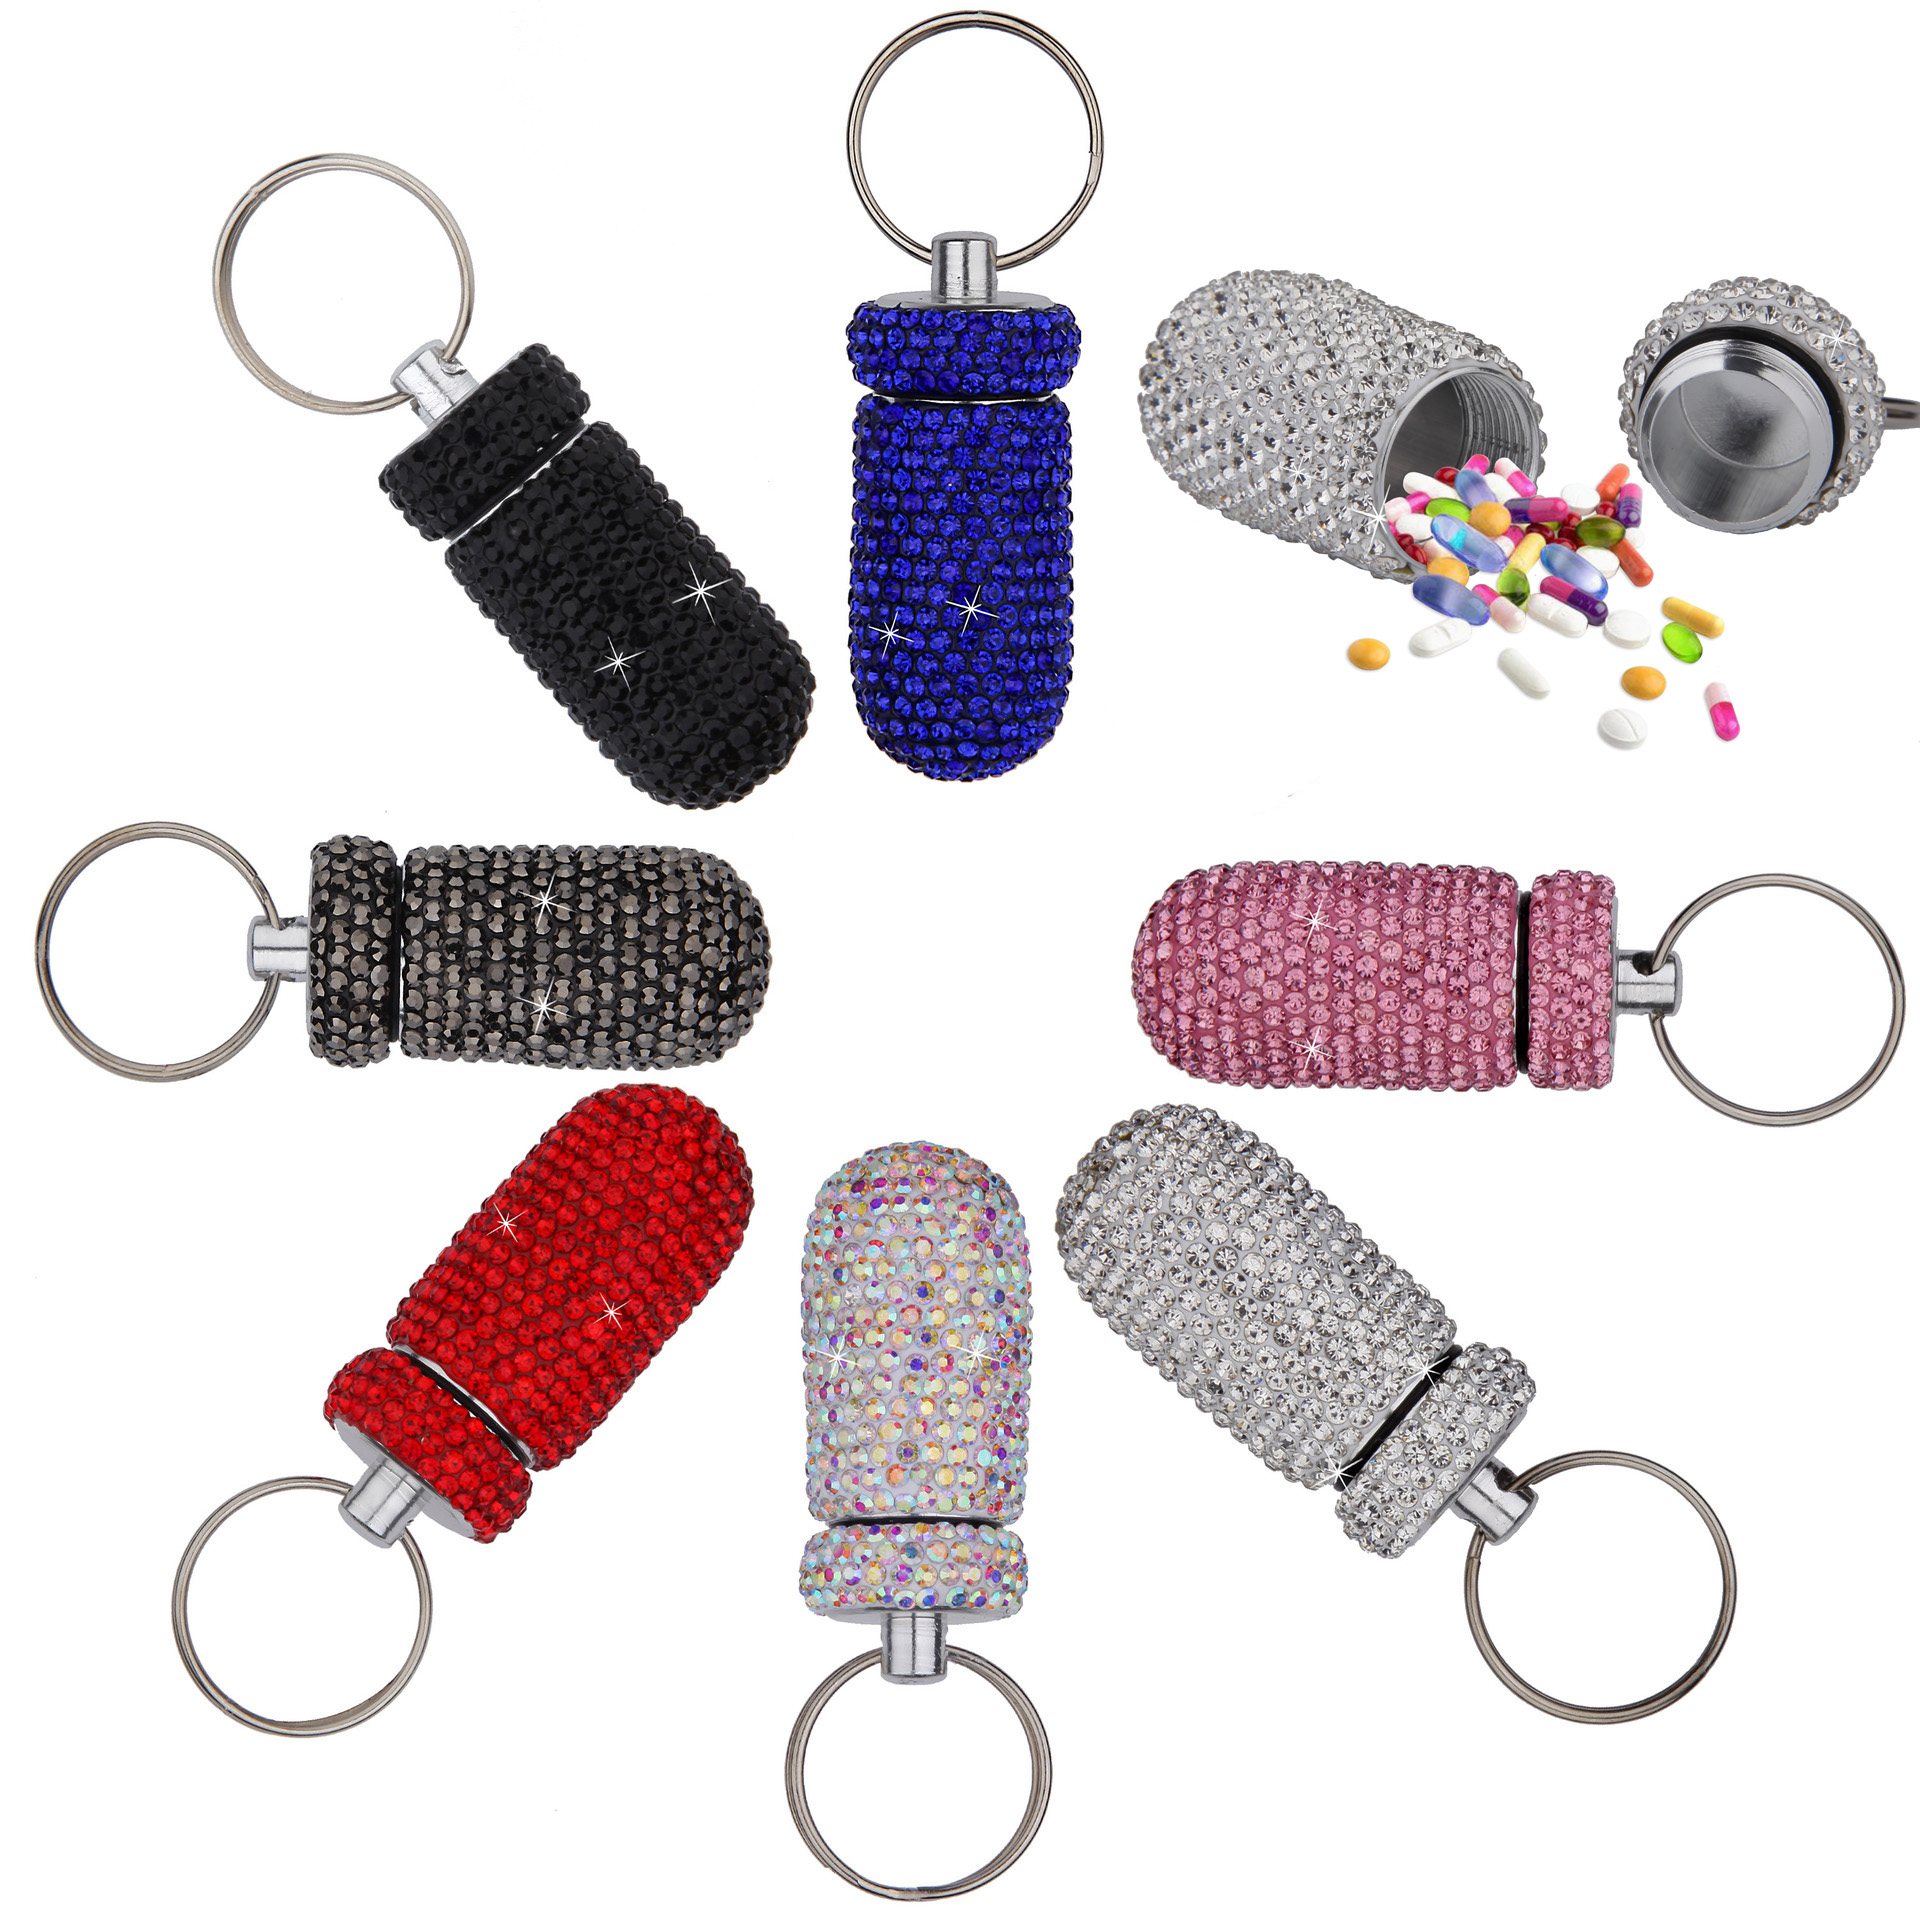 Ezy Dose® Pill Fob Keychain, Great for Travel